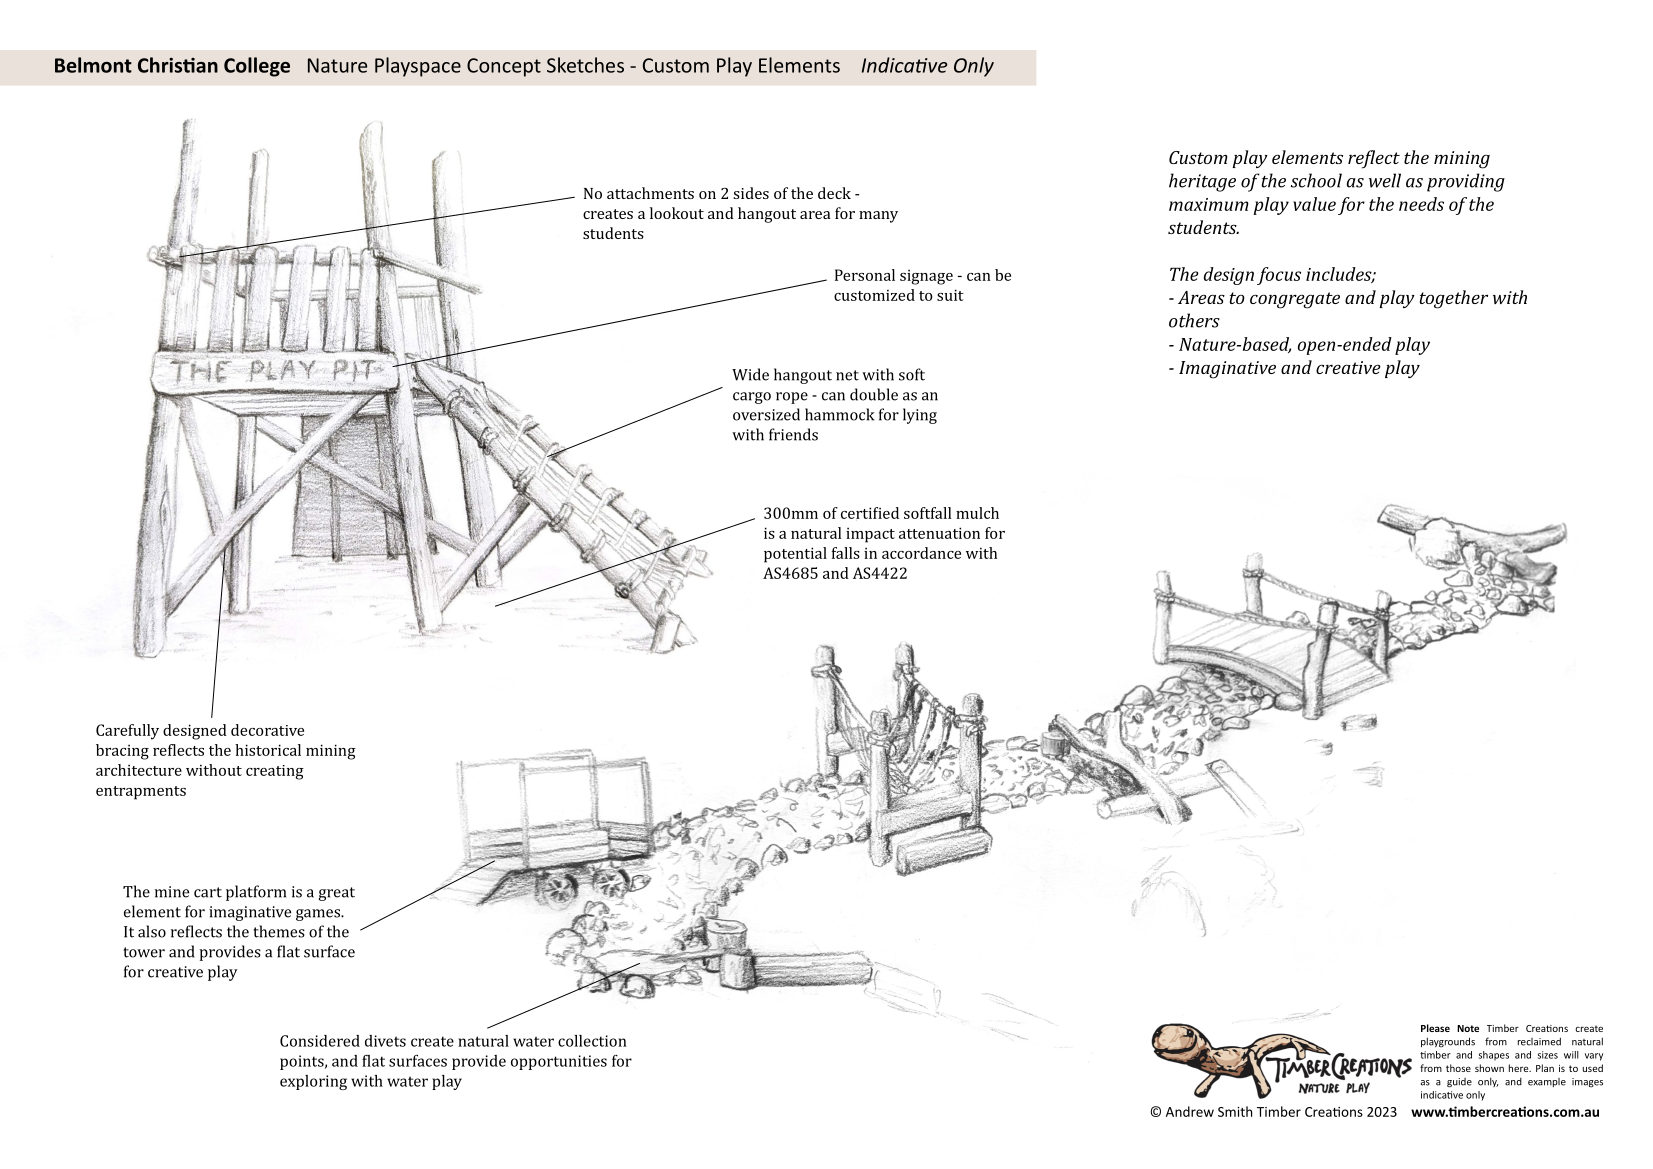  K-2 Nature Playground - Coming Soon, Belmont Christian NATURE PLAYGROUND Concept Design1